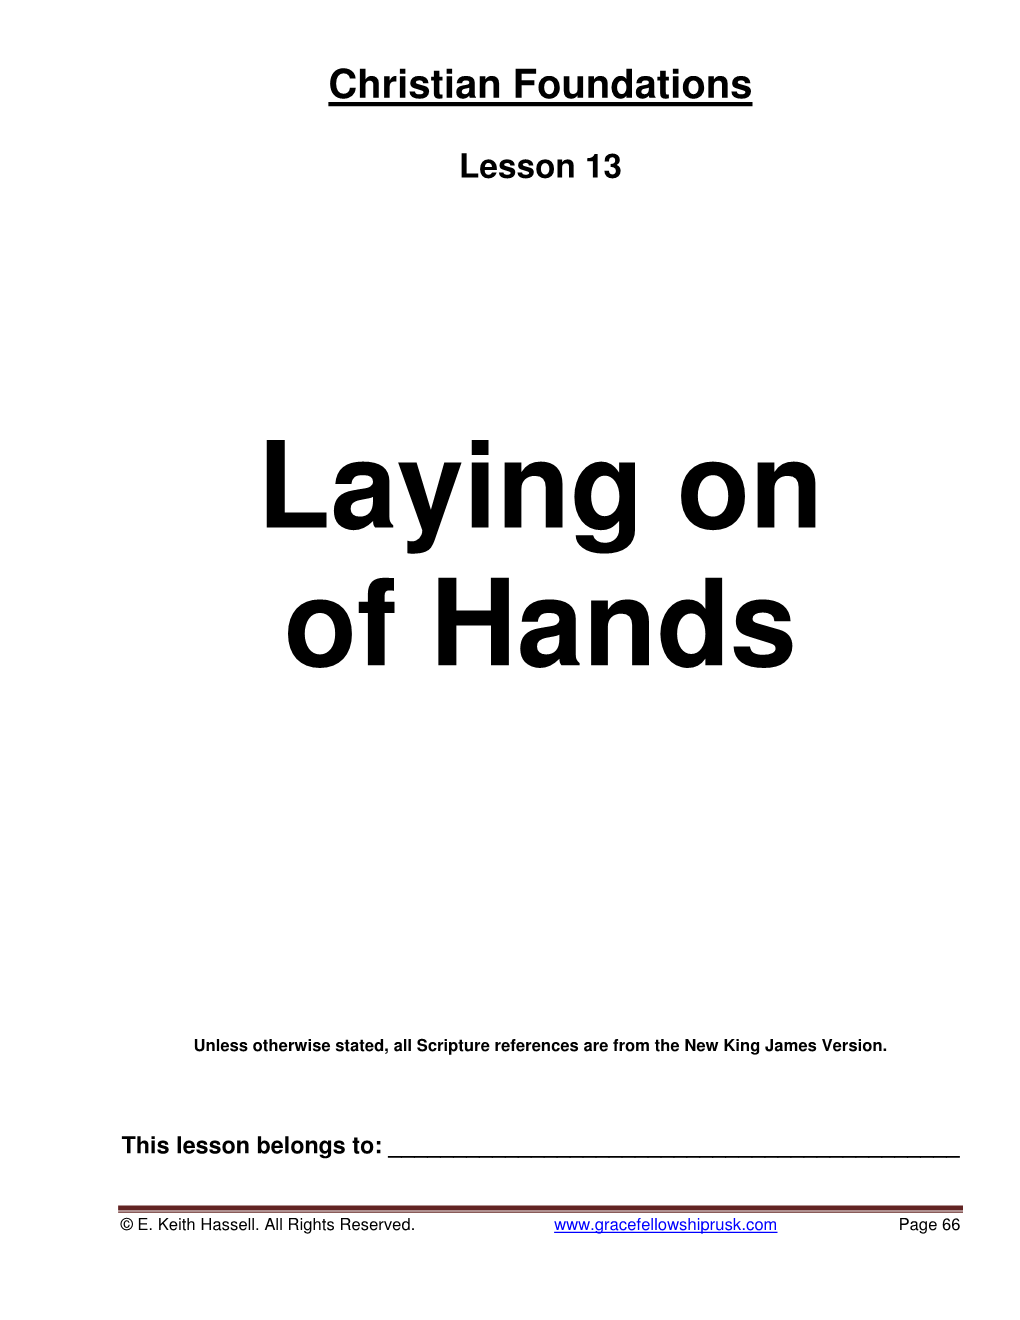 Christian Foundations Lesson 13 Laying on of Hands